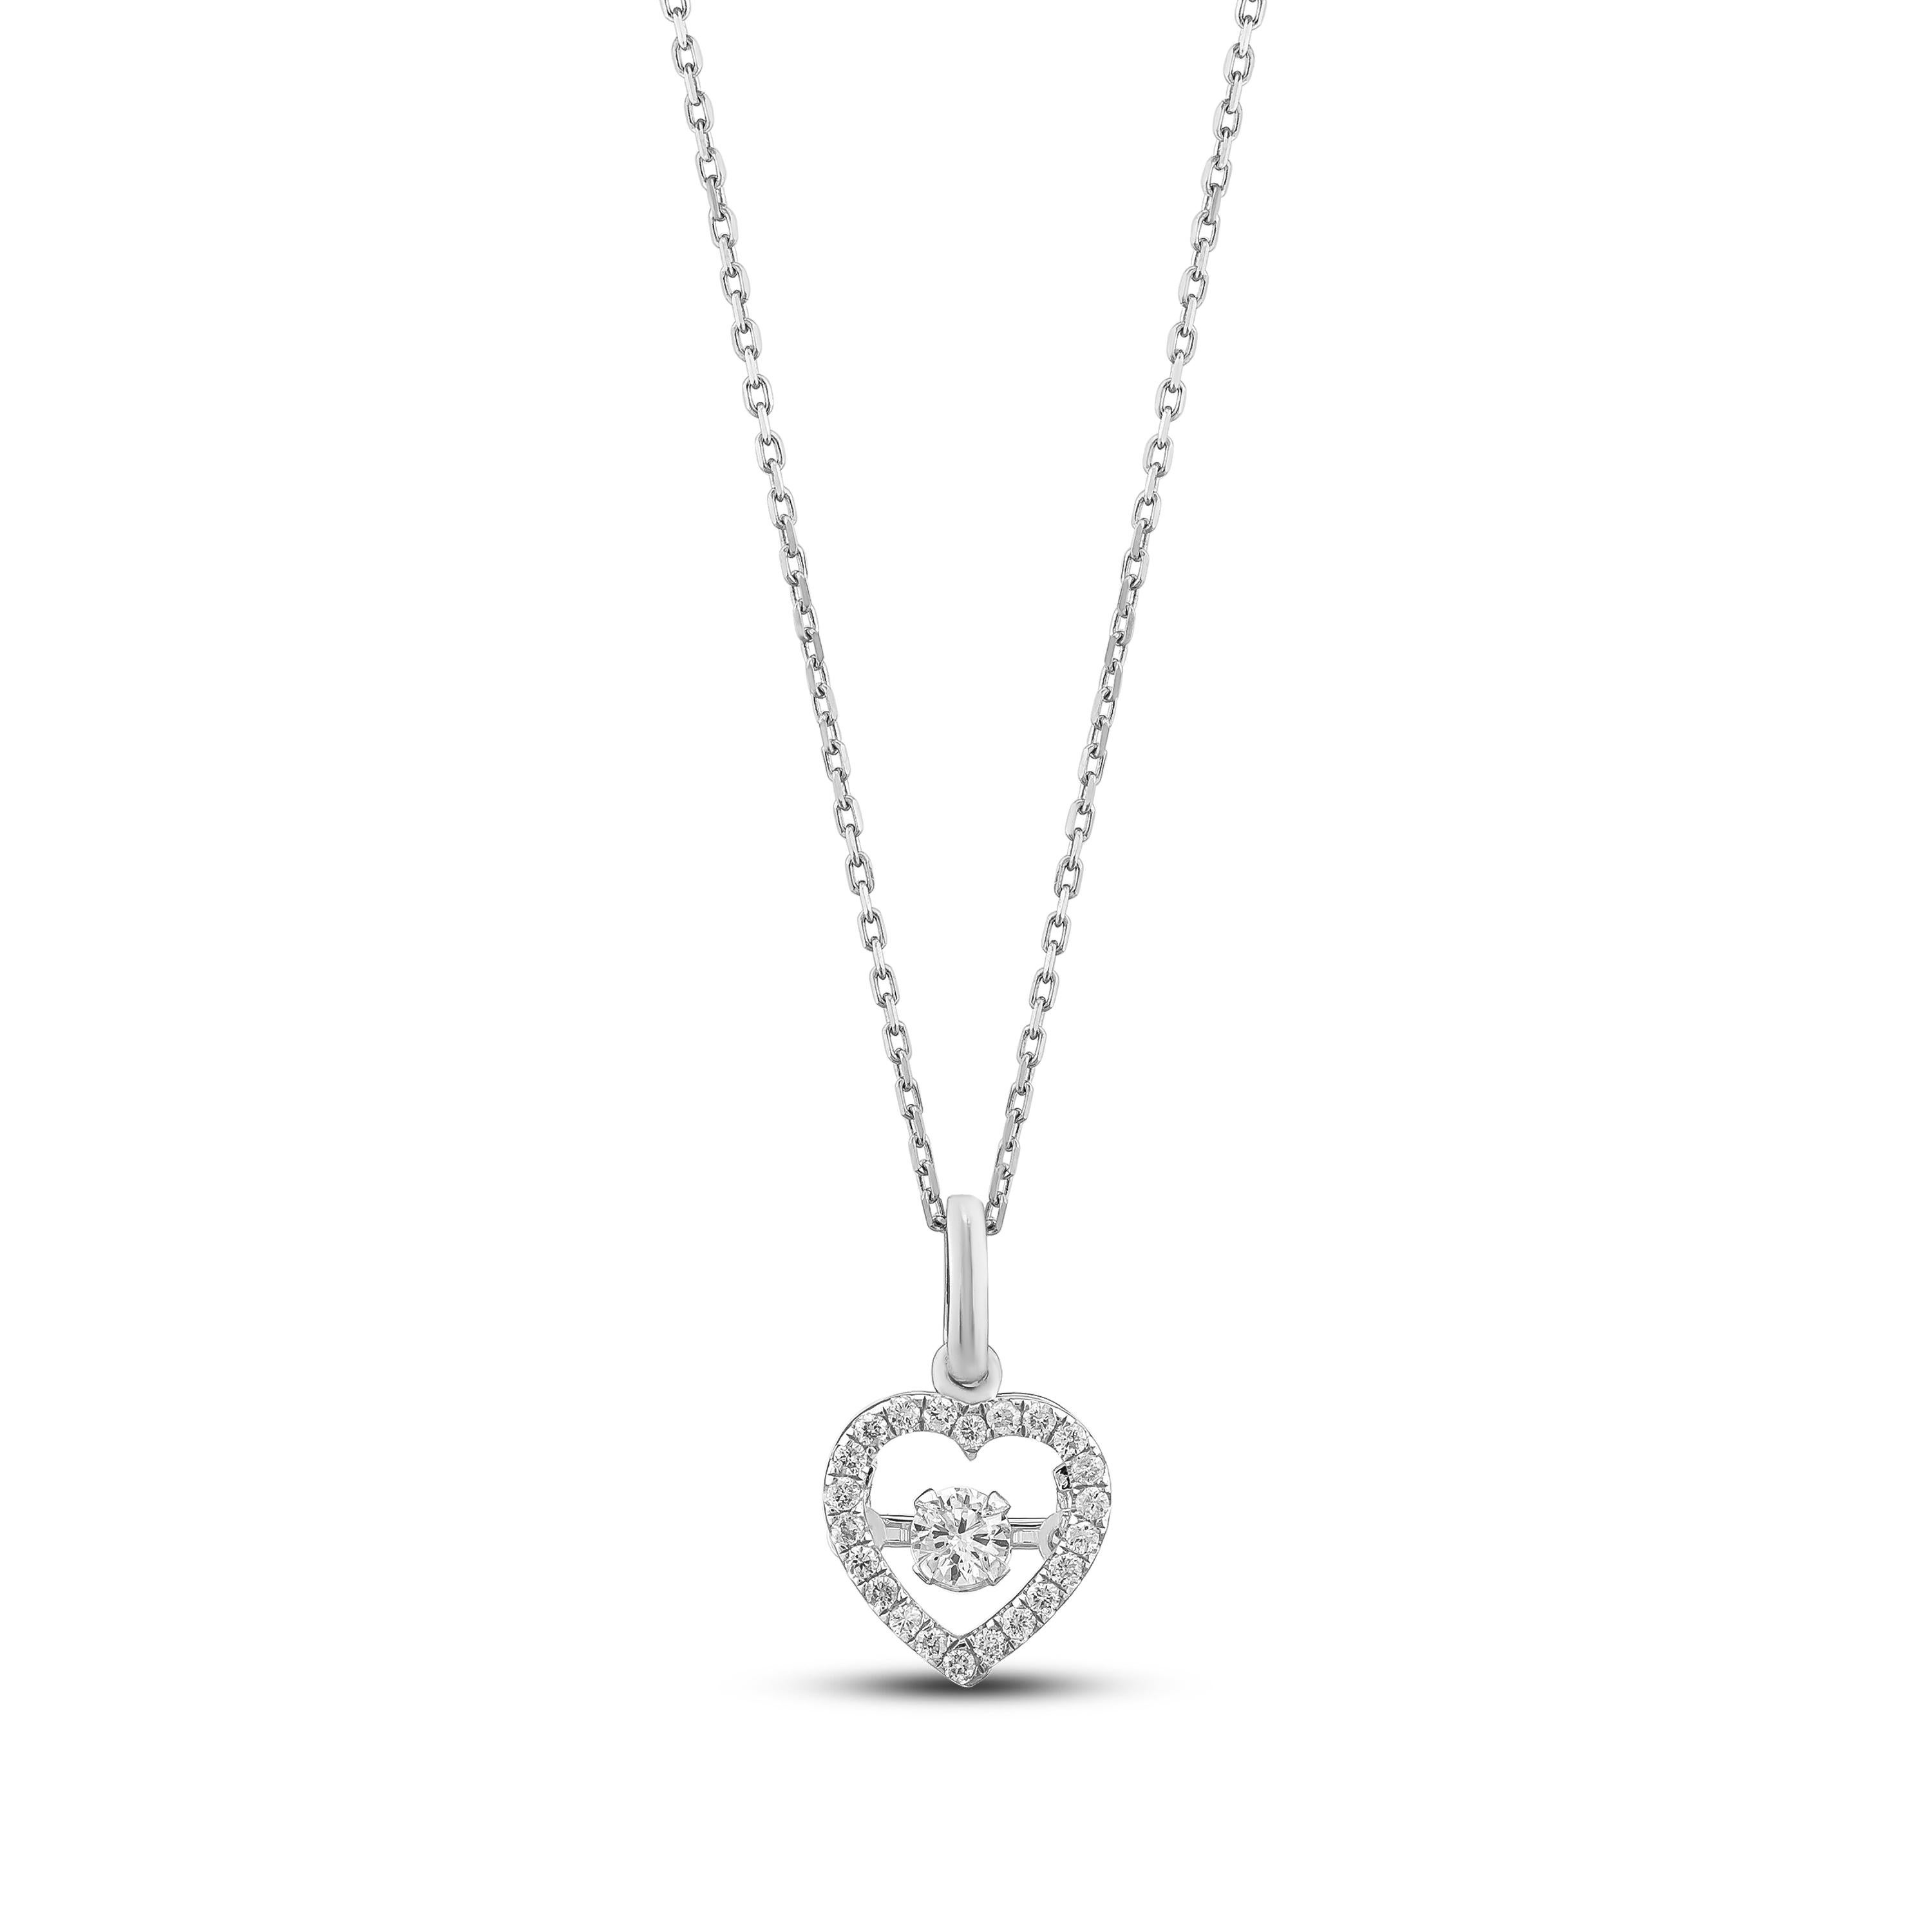 A true gift from the heart, this dainty and delicate pendant features an elegantly sparkling diamond that symbolizes the uniqueness and beauty of love.
A true gift from the heart, this dainty and delicate pendant features an elegantly sparkling